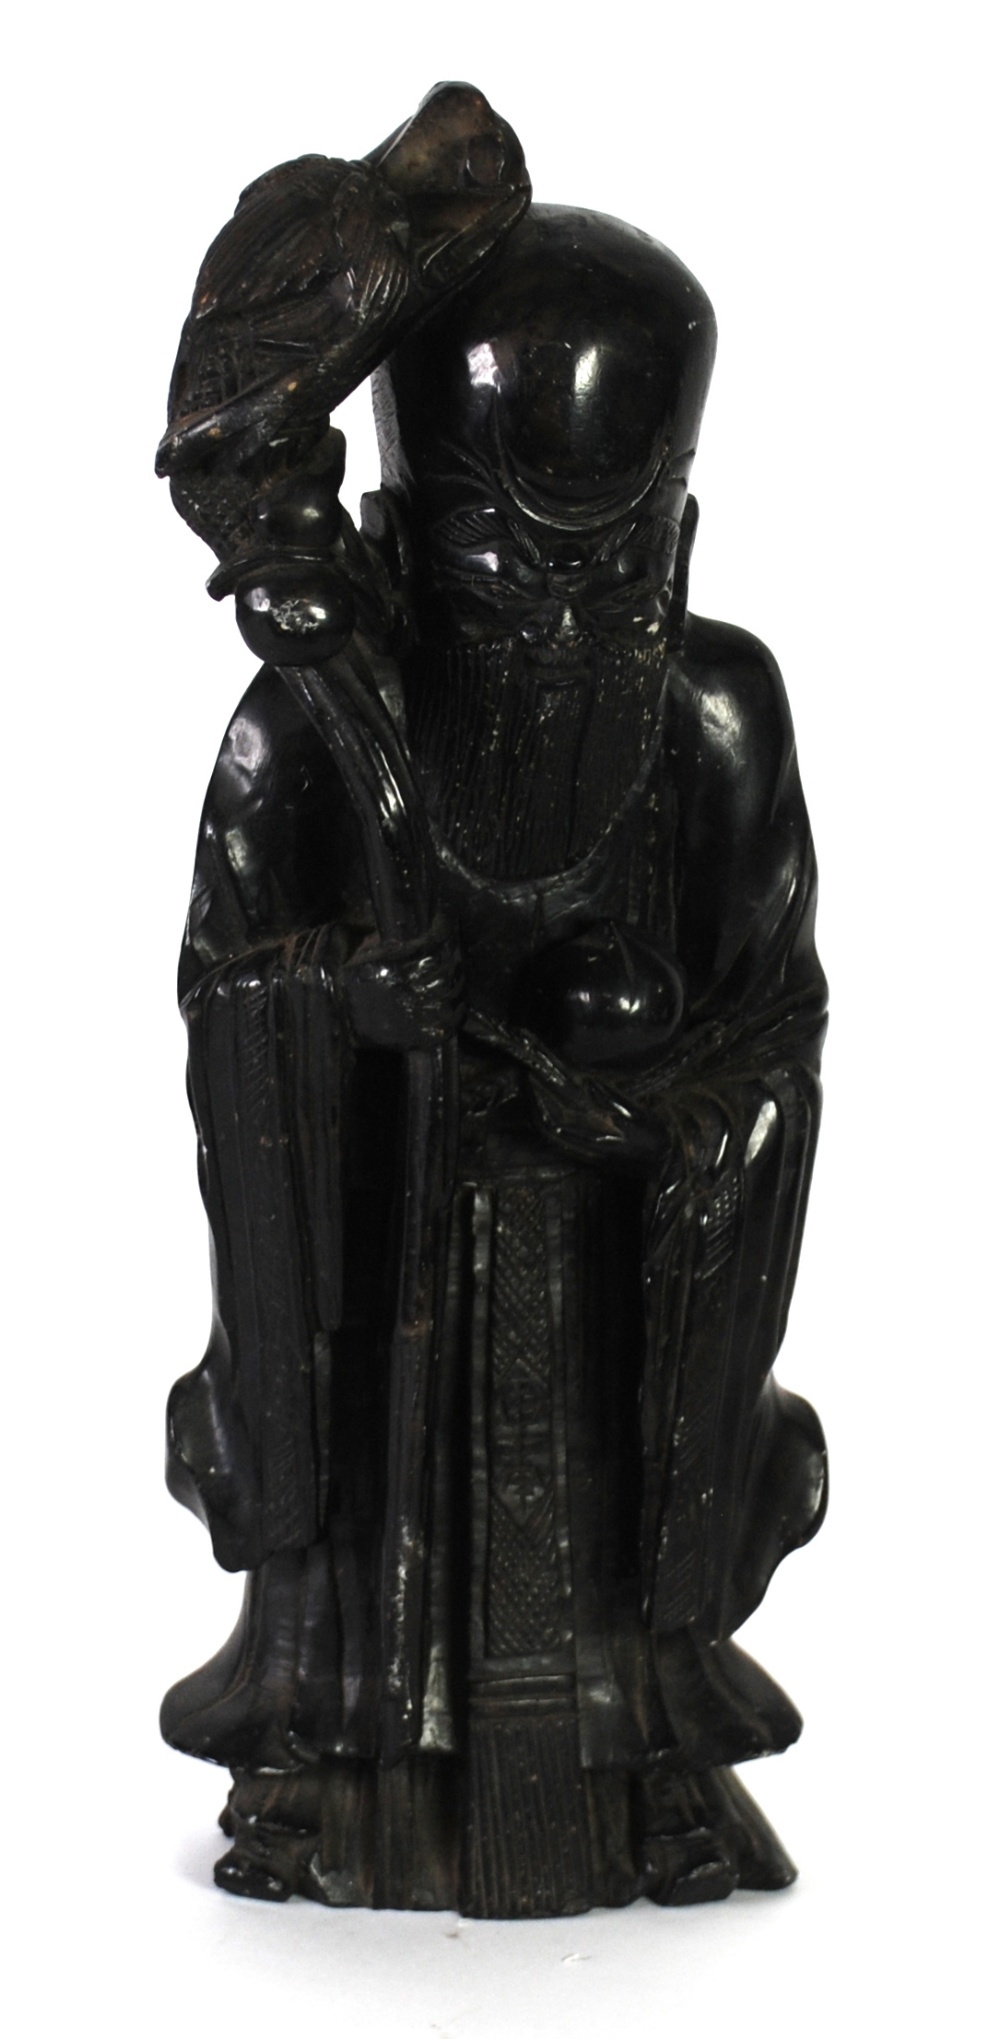 NINETEENTH CENTURY CHINESE CARVED HARDSTONE FIGURE OF A DEITY, modelled holding a persimmon fruit